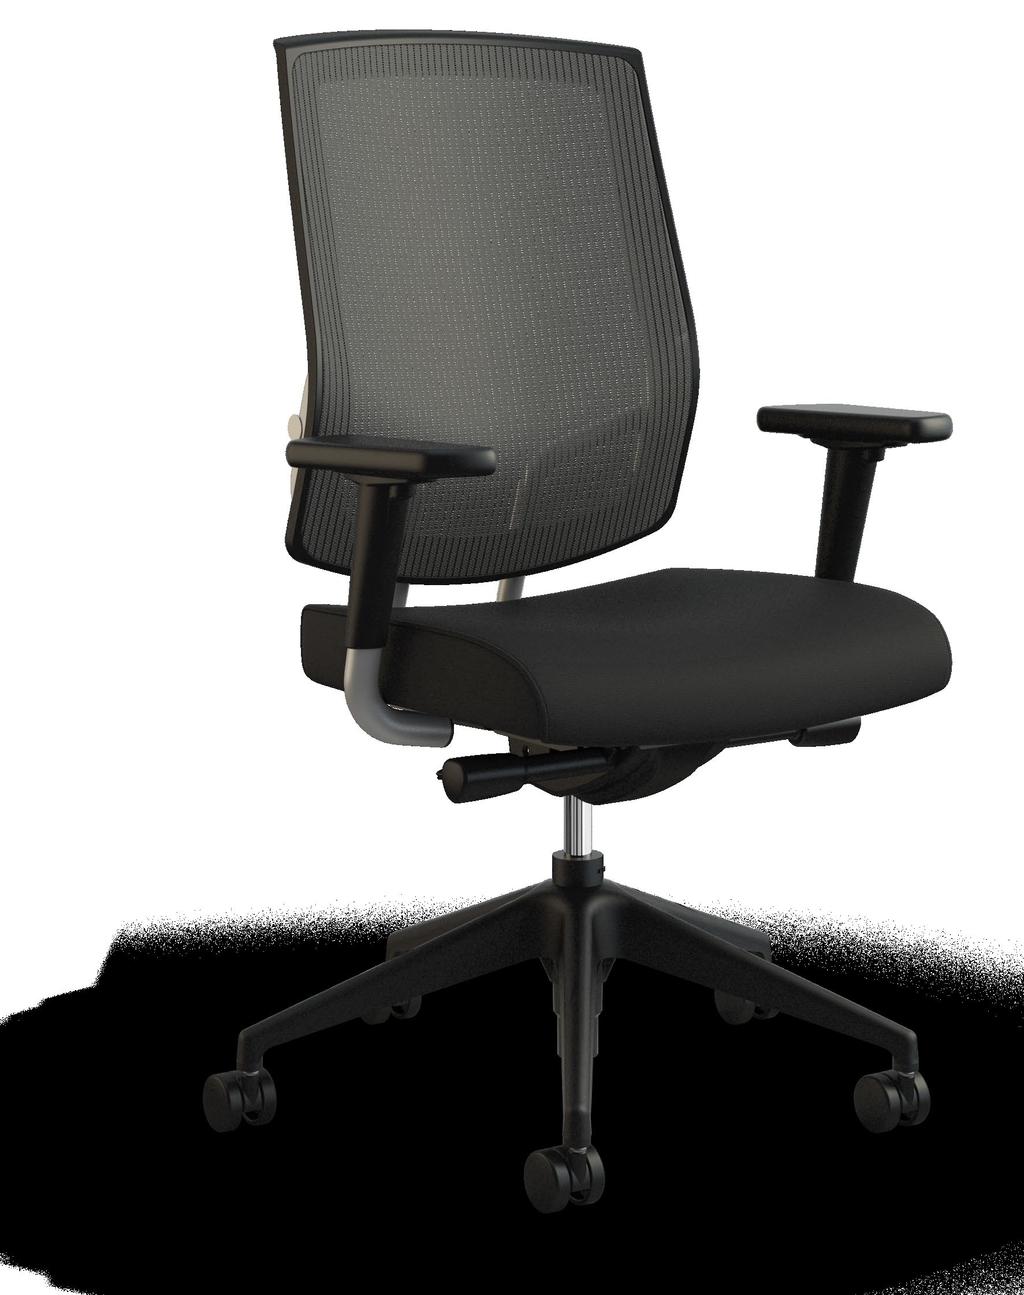 ERGONOMICS AND SUPPORT Fully adjustable arms to meet the size range of users and their